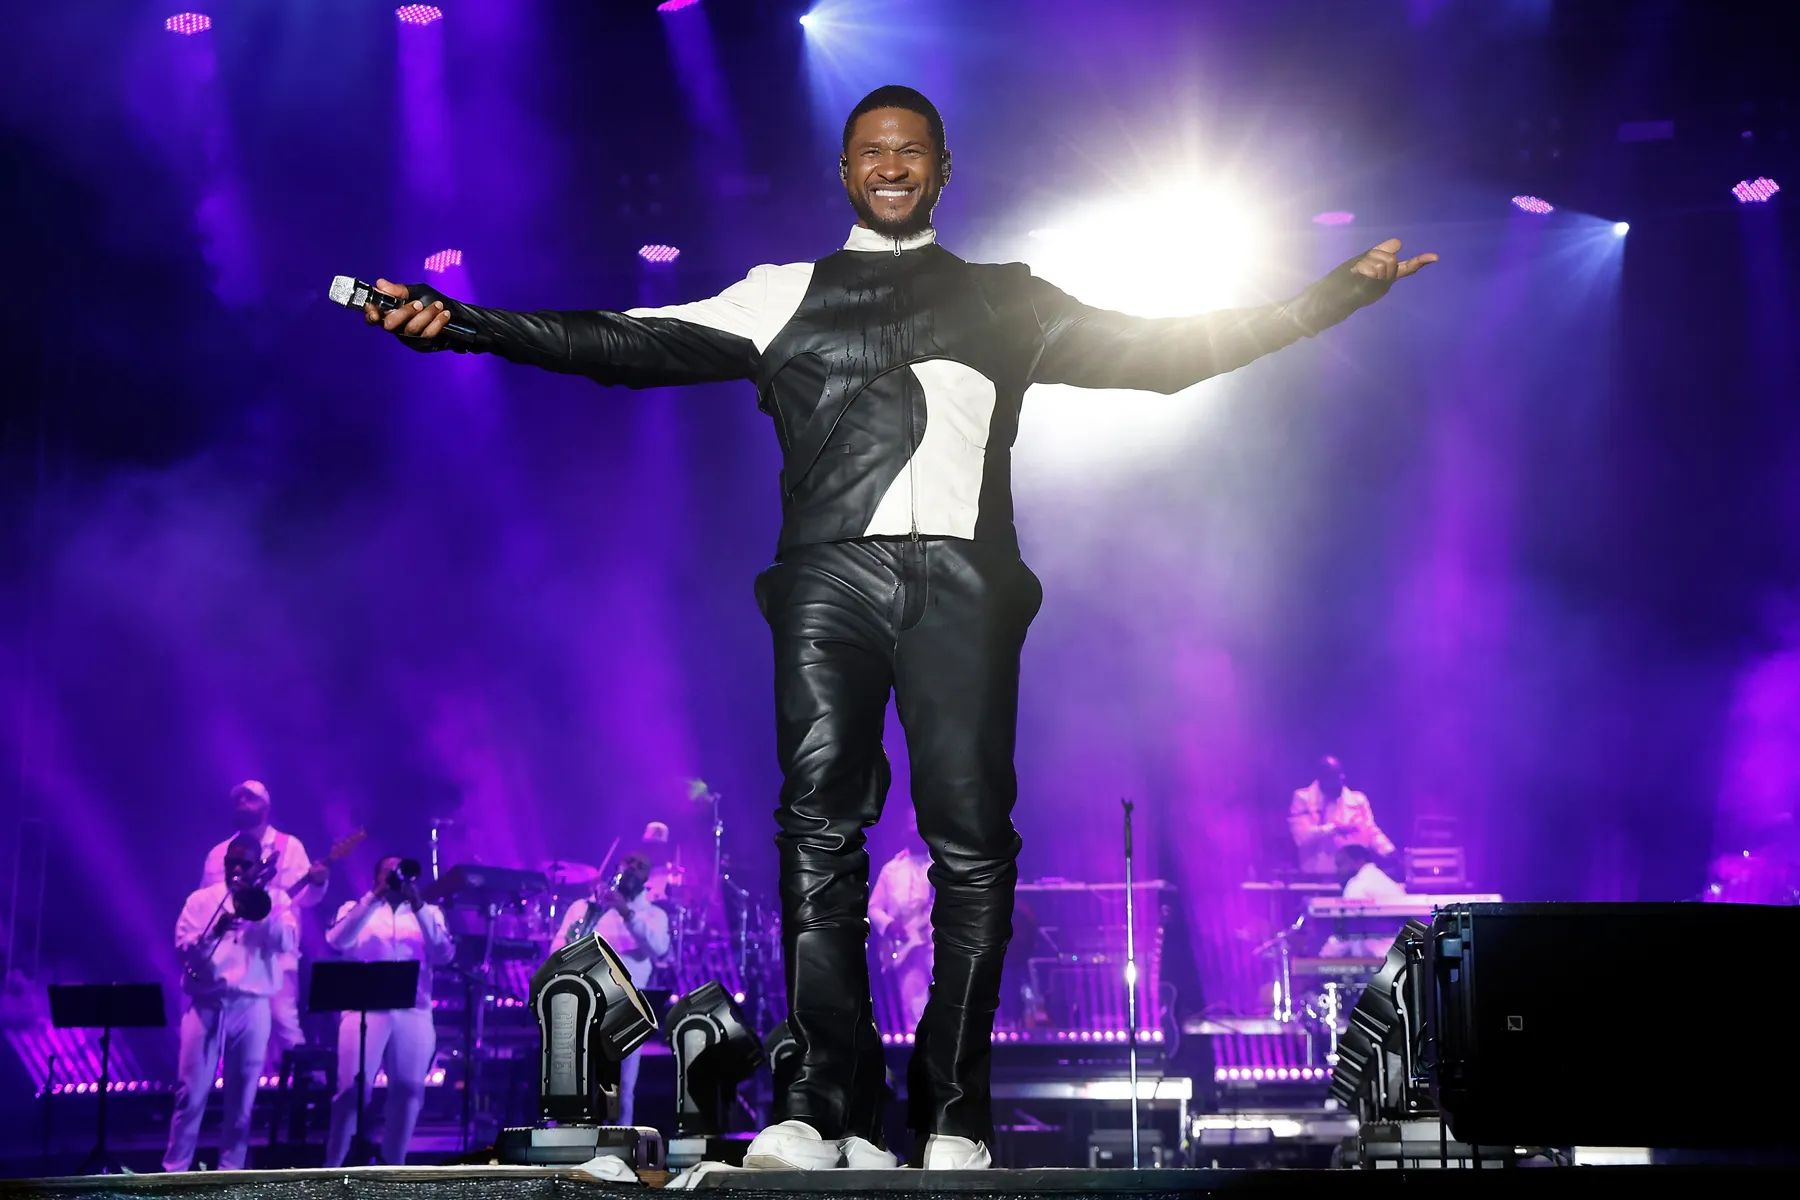 Newswire: Usher’s Music Sees Tremendous Streaming Surge After Super Bowl Halftime Announcement